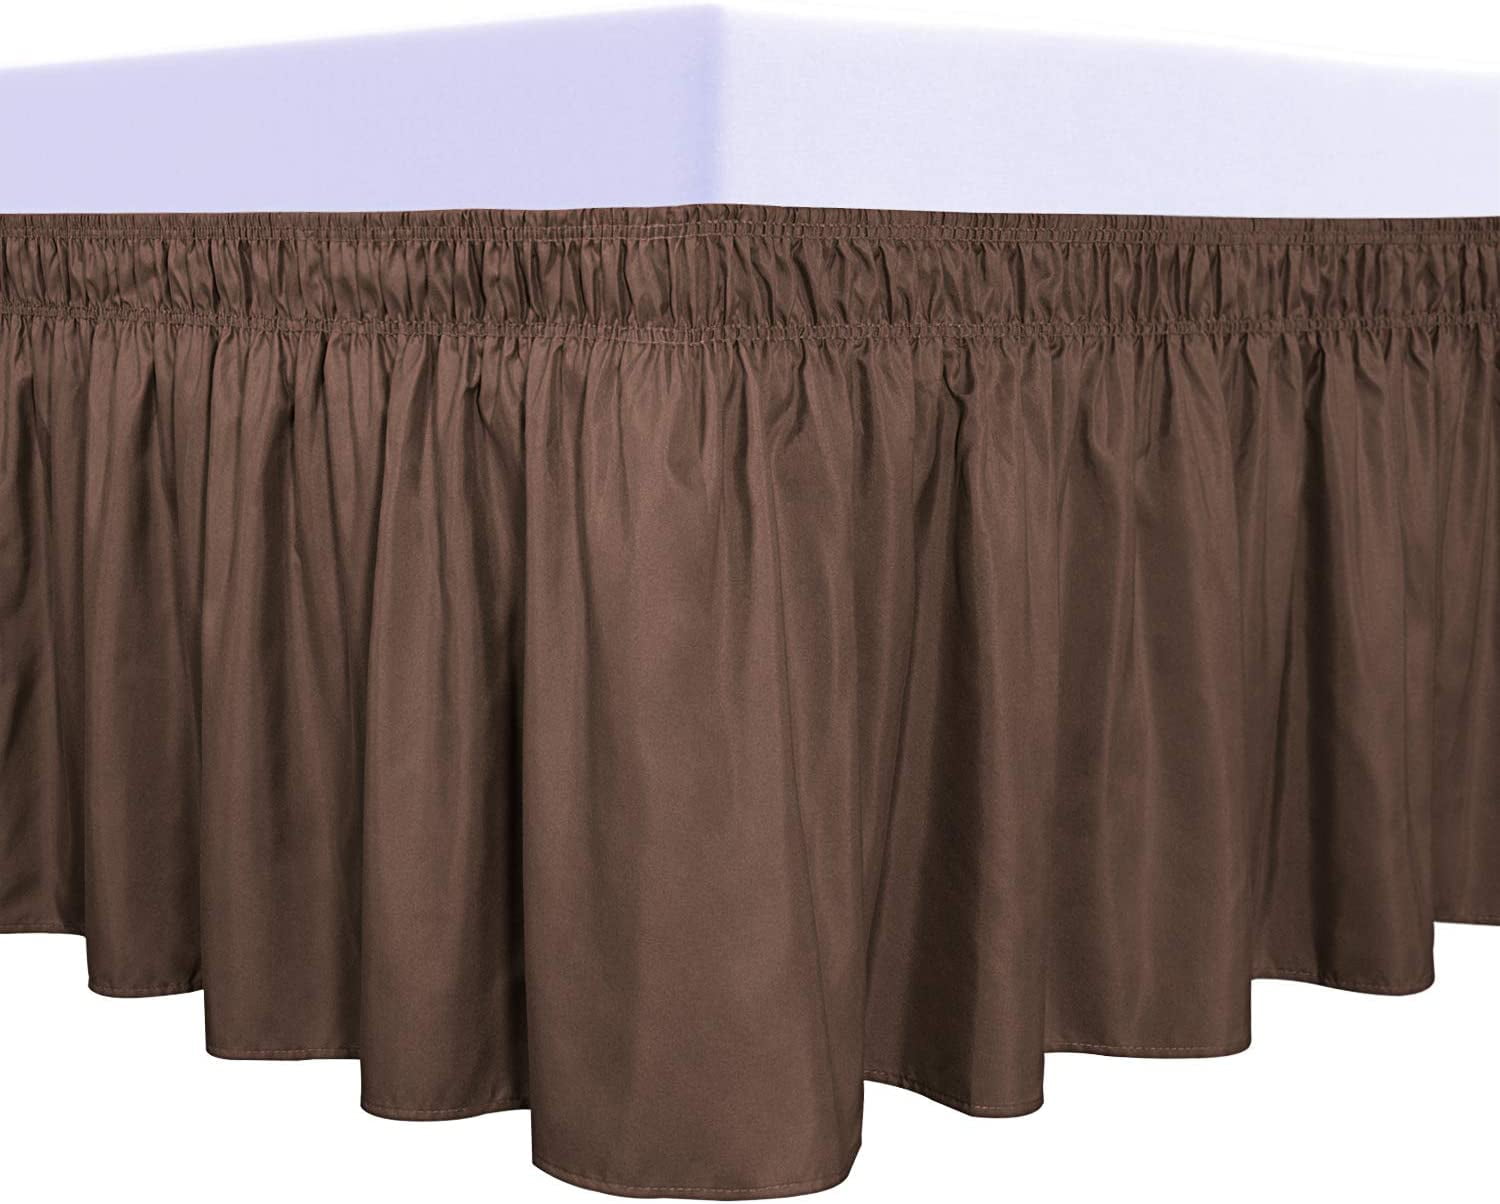 Wrap Around Style Brown Ruffled Solid Bed Skirt Fits Both Queen and King Size 